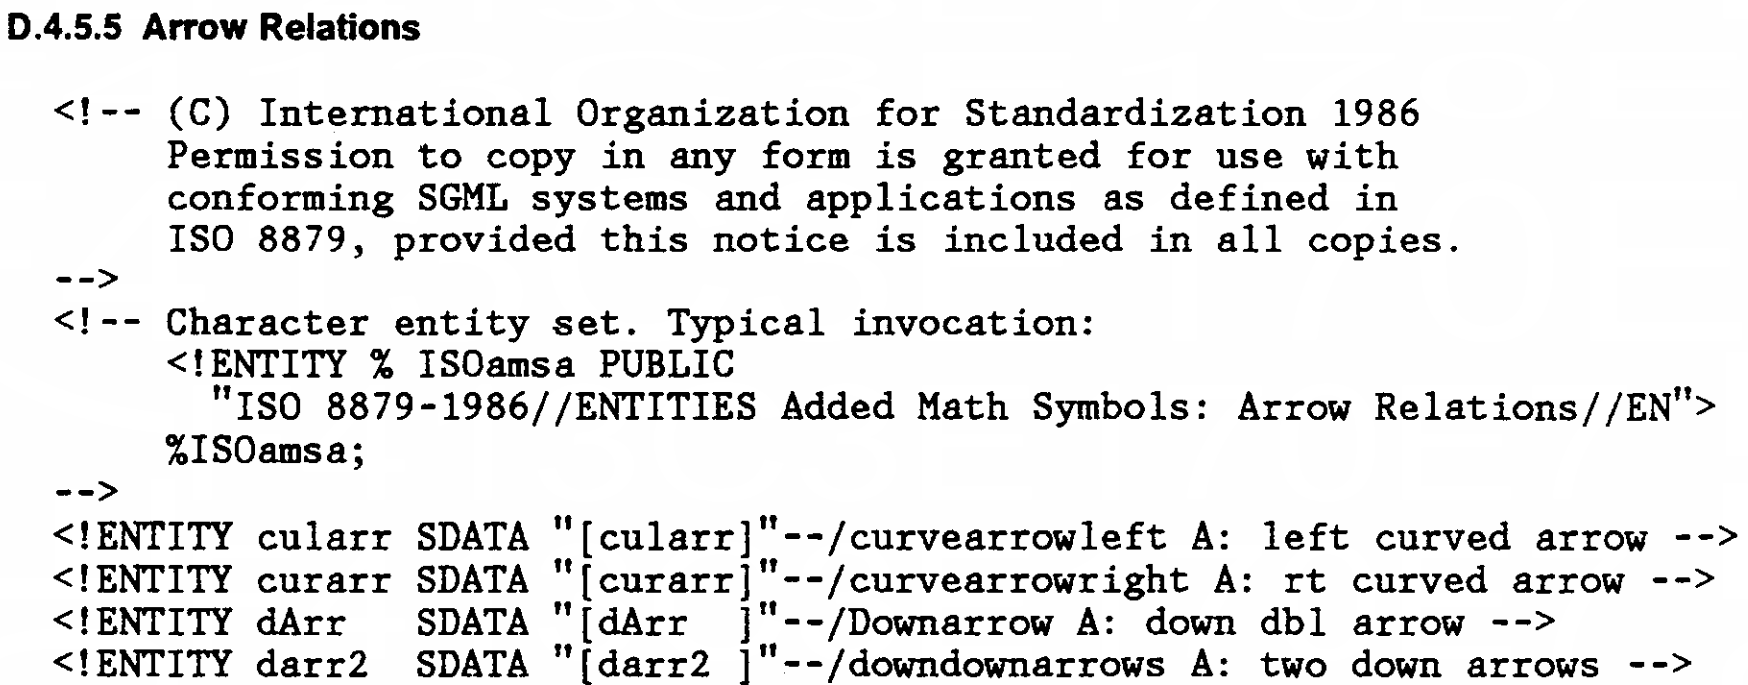 D.4.5.5 Arrow Relations

<!-- (C) International Organization for Standardization 1986
     Permission to copy in any form is granted for use with
     confirming SGML systems and applications as defined in
     ISO 8879, provided this notice is included in all copies.
-->
<!-- Character entity set. Typical invocation:
     <!ENTITY % ISOamsa PUBLIC
     "ISO 8879-1986//ENTITIES Added Math Symbols: Arrow Relations//EN">
     %ISOamsa;
-->
<!ENTITY cularr SDATA "[cularr]"--/curvearrowleft A: left curved arrow -->
<!ENTITY curarr SDATA "[curarr]"--/curvearrowright A: rt curved arrow -->
<!ENTITY dArr   SDATA "[dArr  ]"--Downarrow A: down dbl arrow -->
<!ENTITY darr2  SDATA "[darr2 ]"--downdownarrows A: two down arrows -->